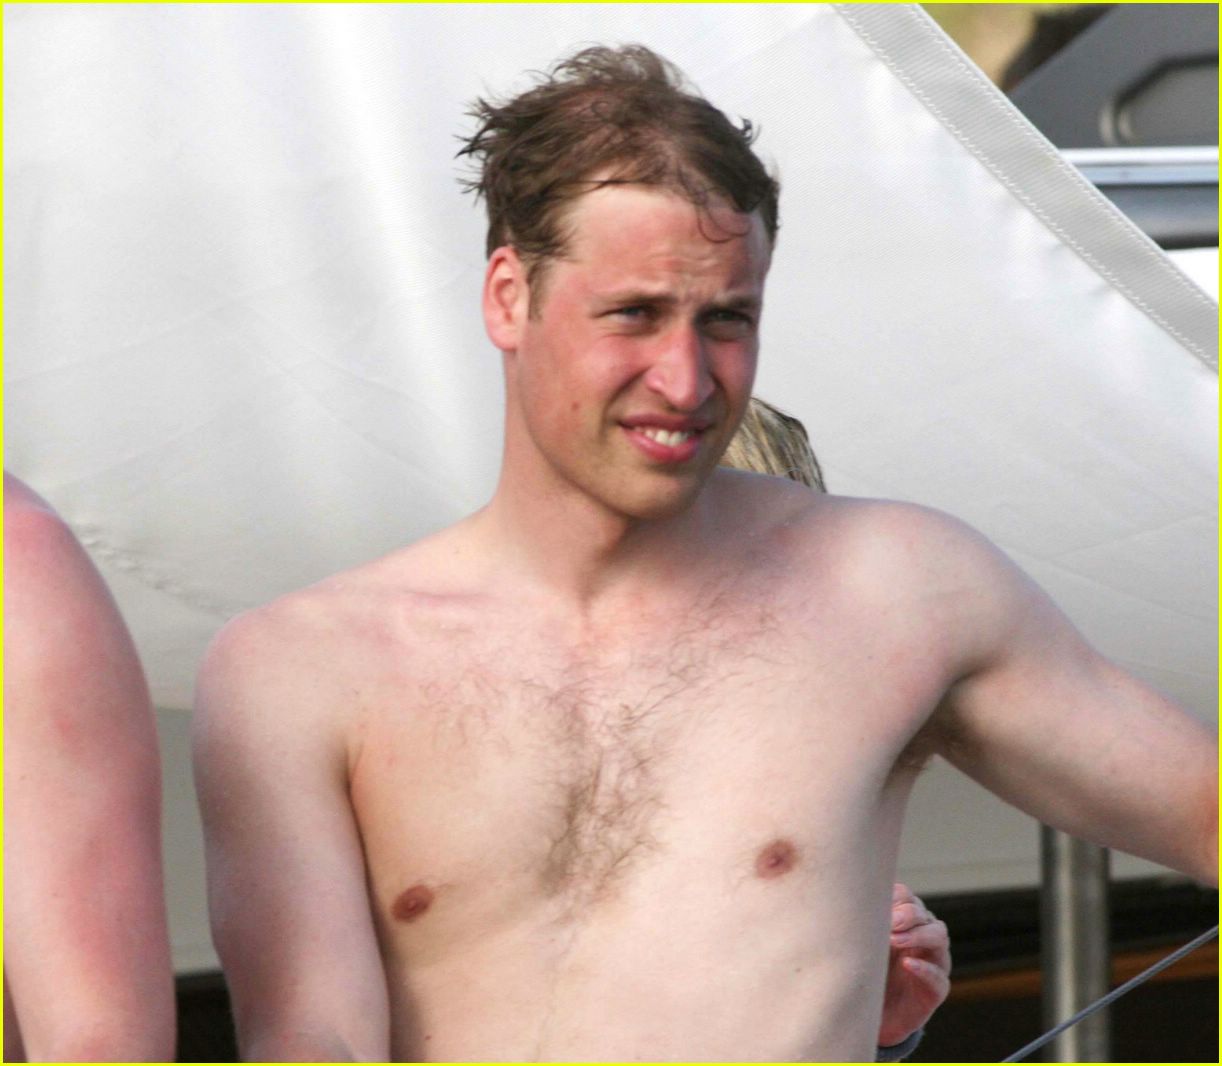 Prince William Photo 73 Of 845 Pics Wallpaper Photo 385227 Theplace2 